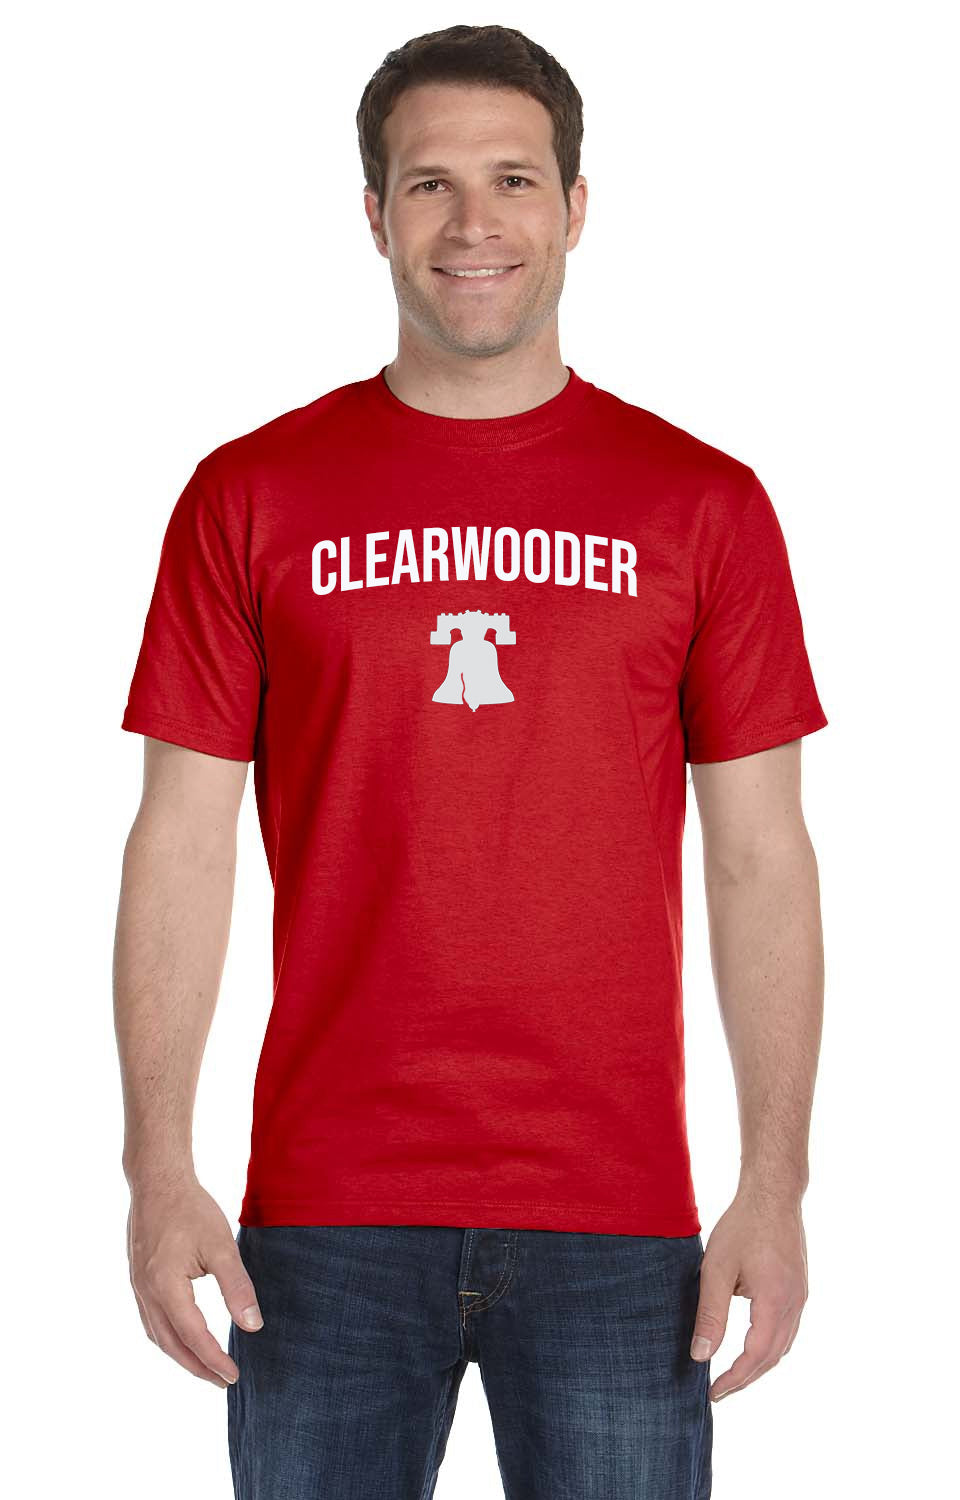 Clearwooder Red T-shirt